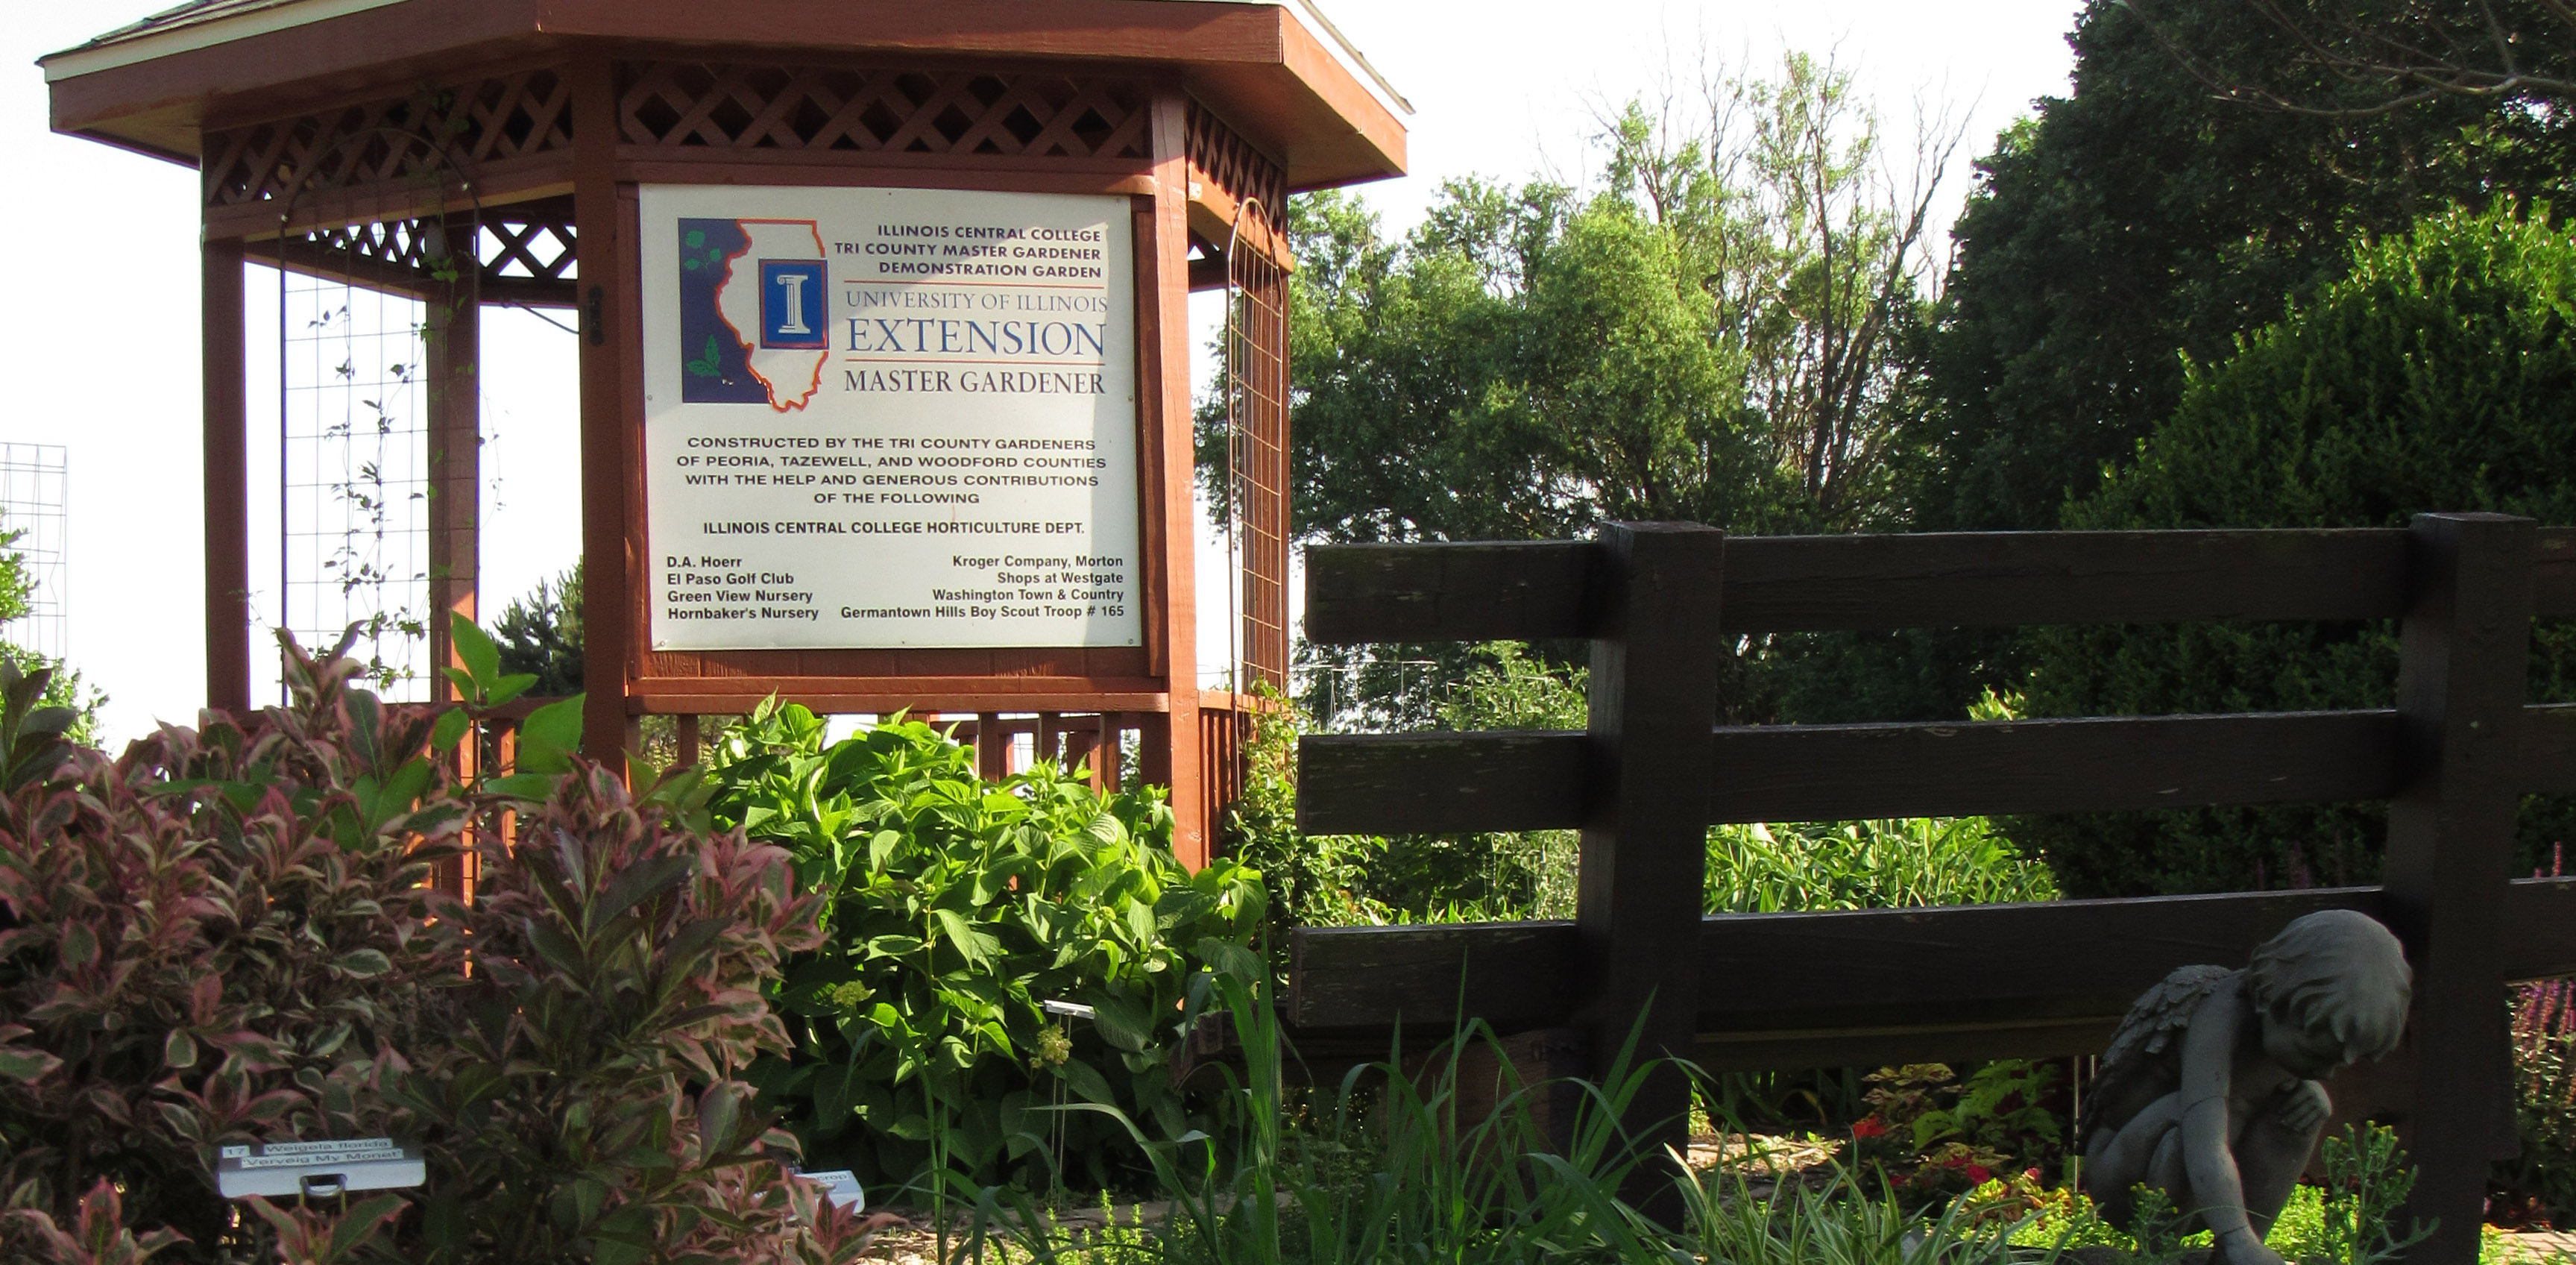 A variegated wiegela, ICC demonstration garden sign and a child statue all situated in a gardenbeds